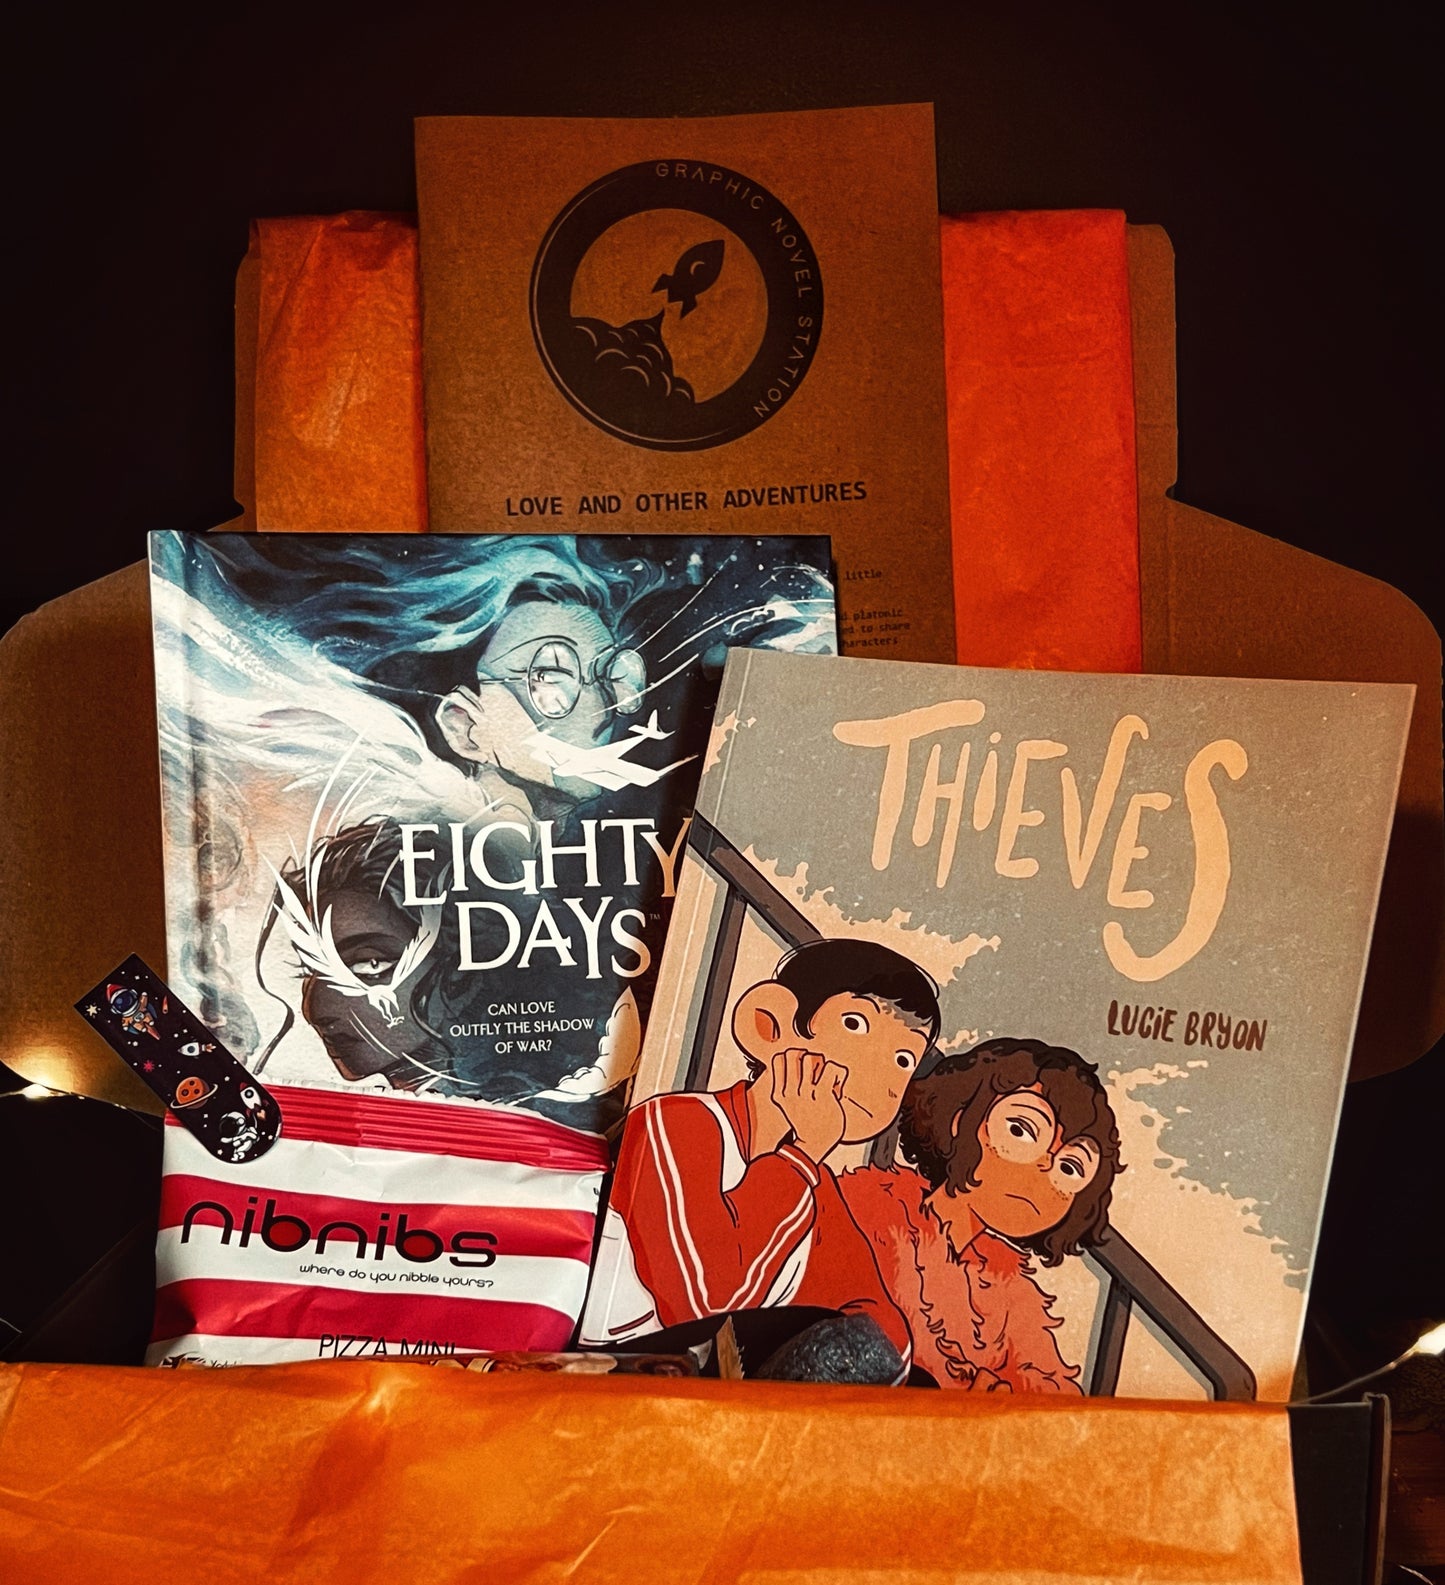 November’s box - Love and other adventures